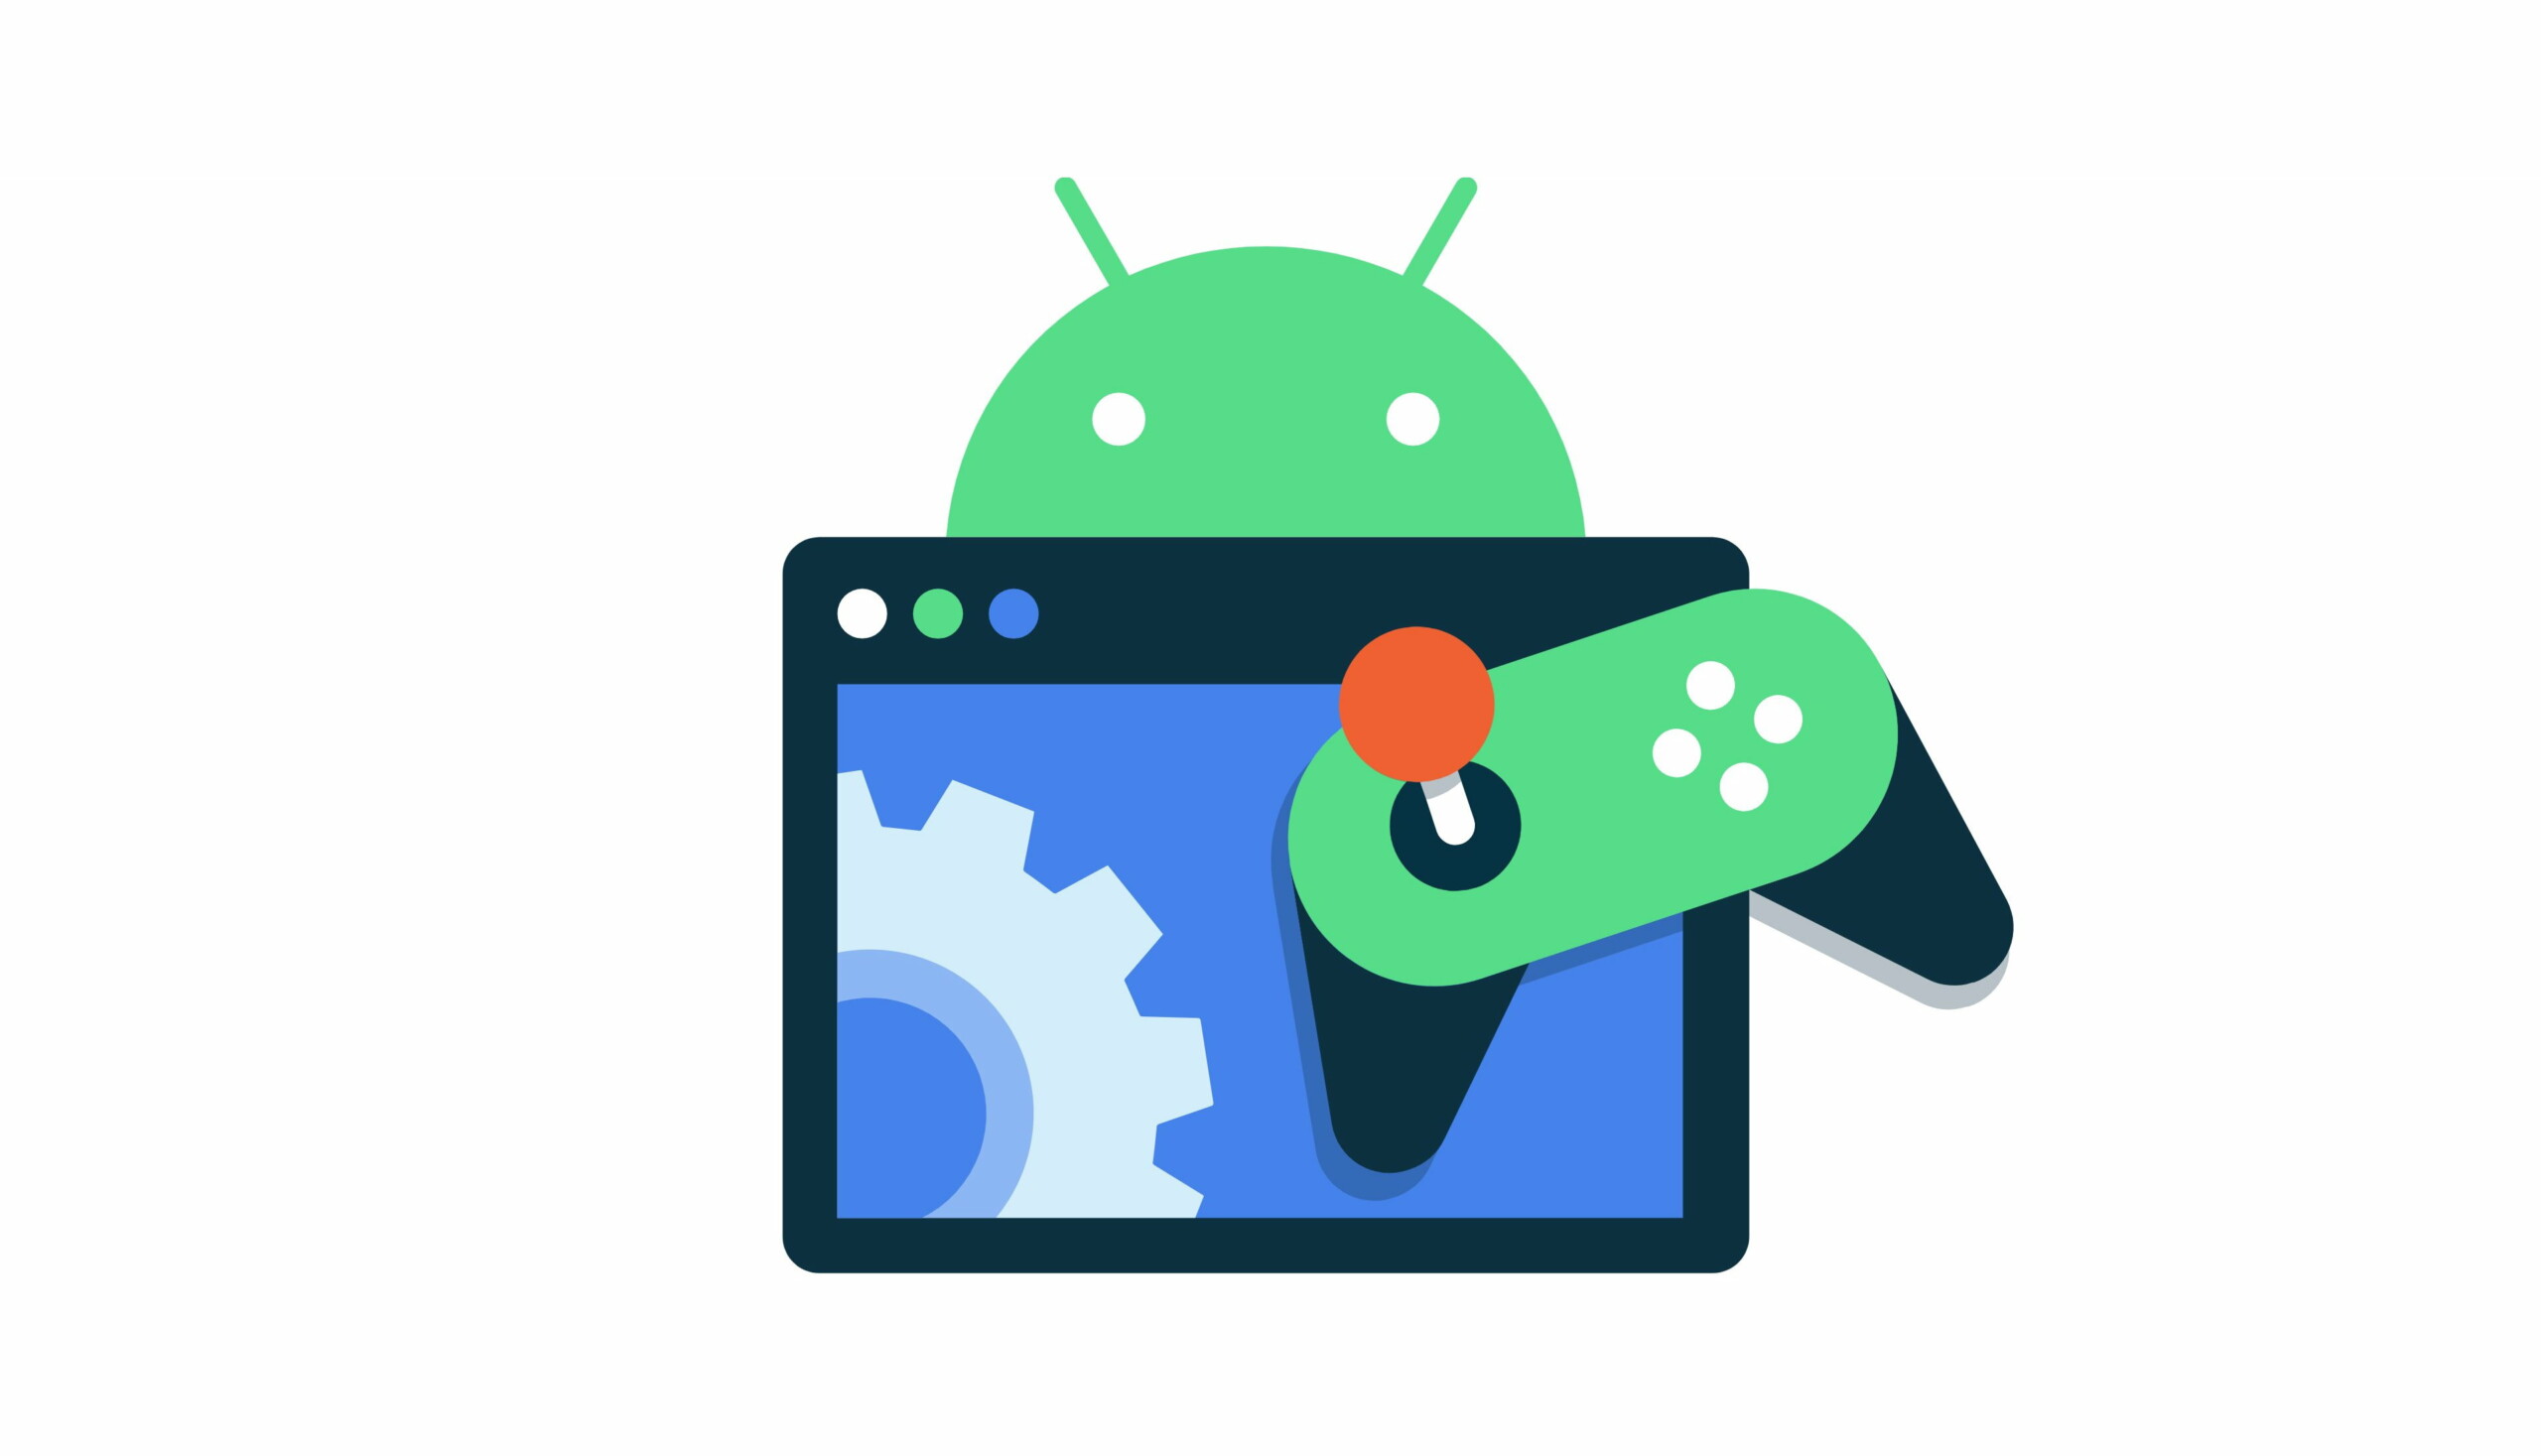 Gamers will appreciate: Android 12 will let you run games without waiting for the download to finish